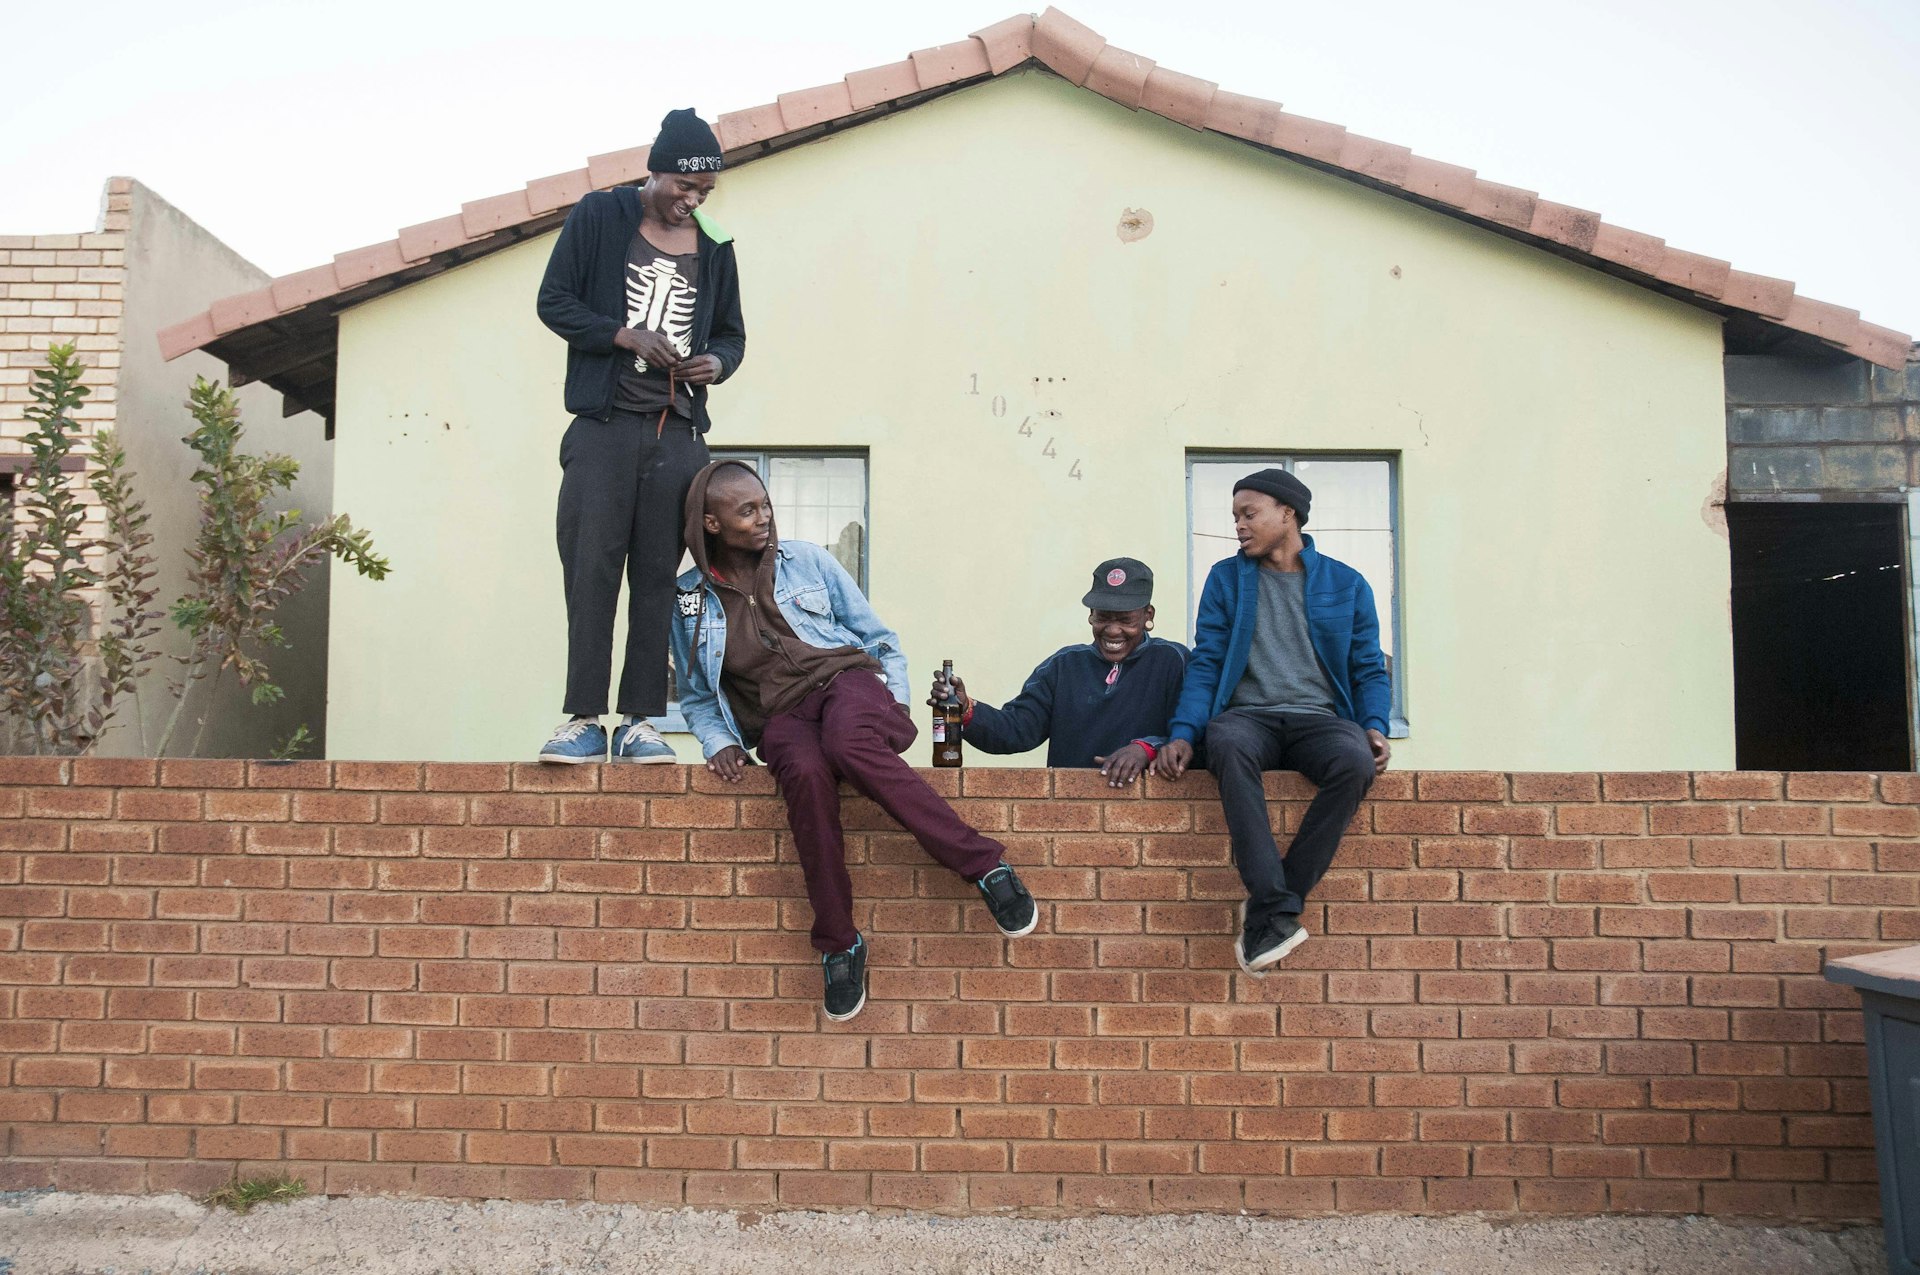 Hanging out at the Dogg Pound, TCIYF's skate house.  Left to right: Thula, guitarist; Pule, lead vocalist;  Jazz, drummer; Toxic, bassist.